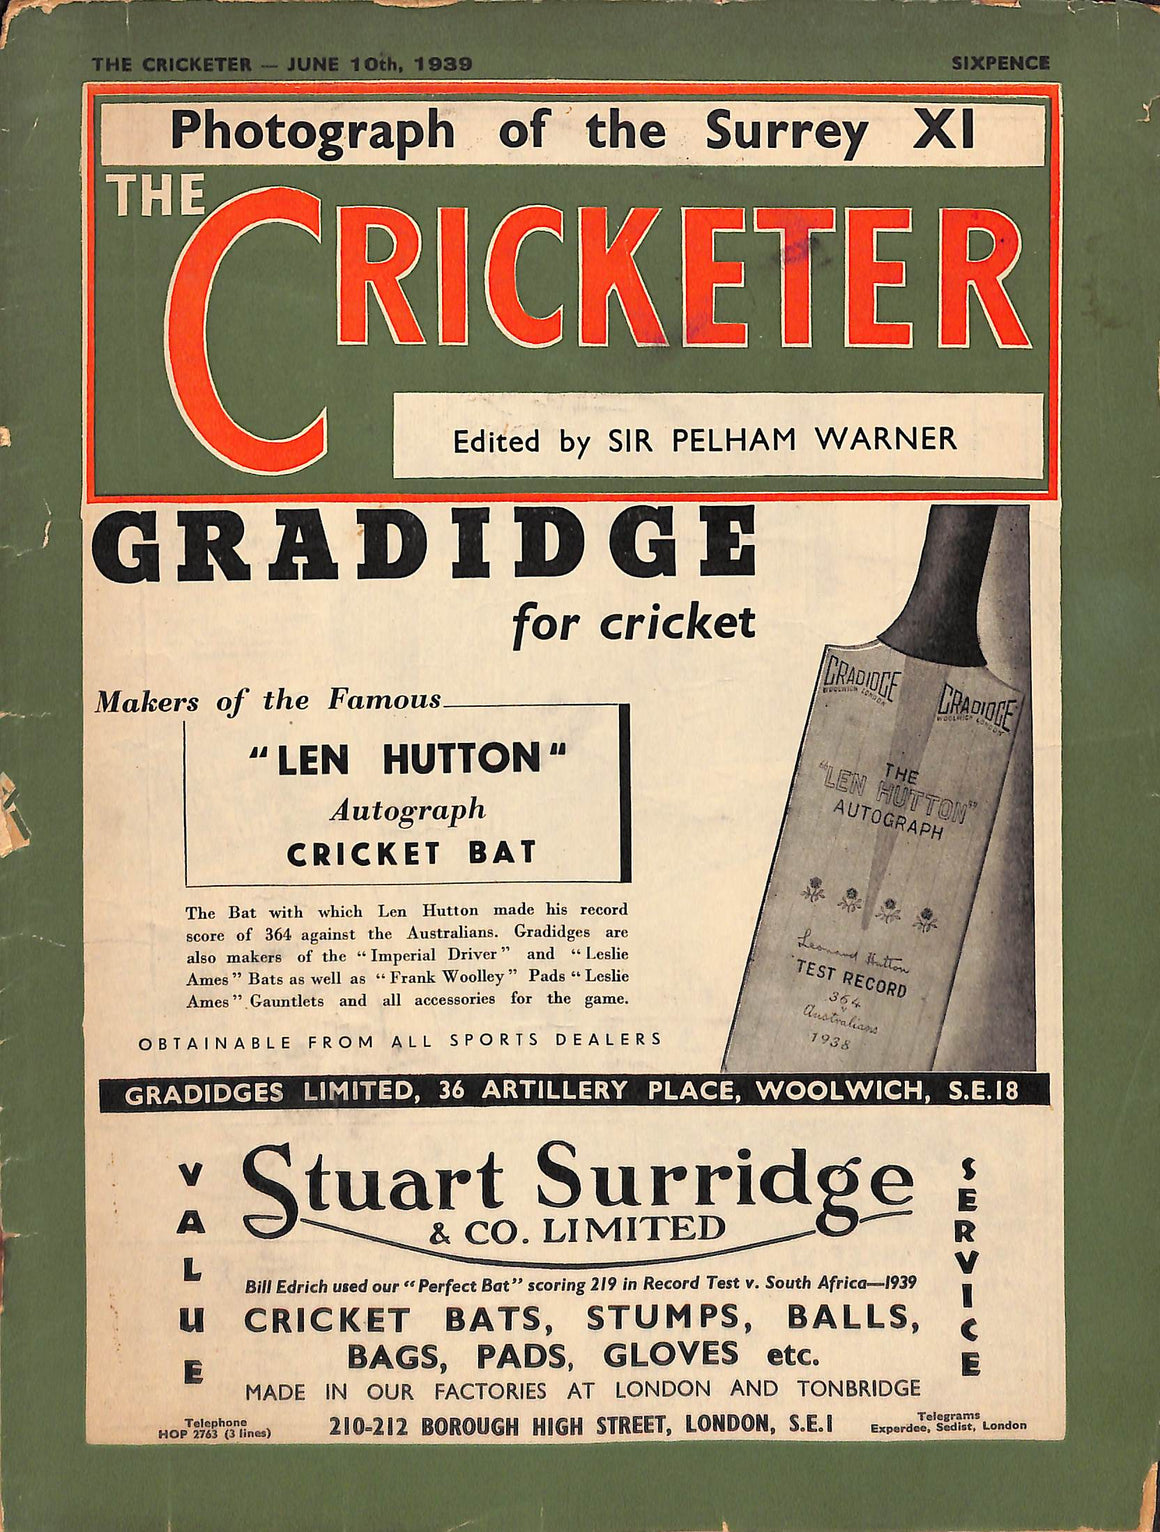 'The Cricketer - June 10th, 1939'